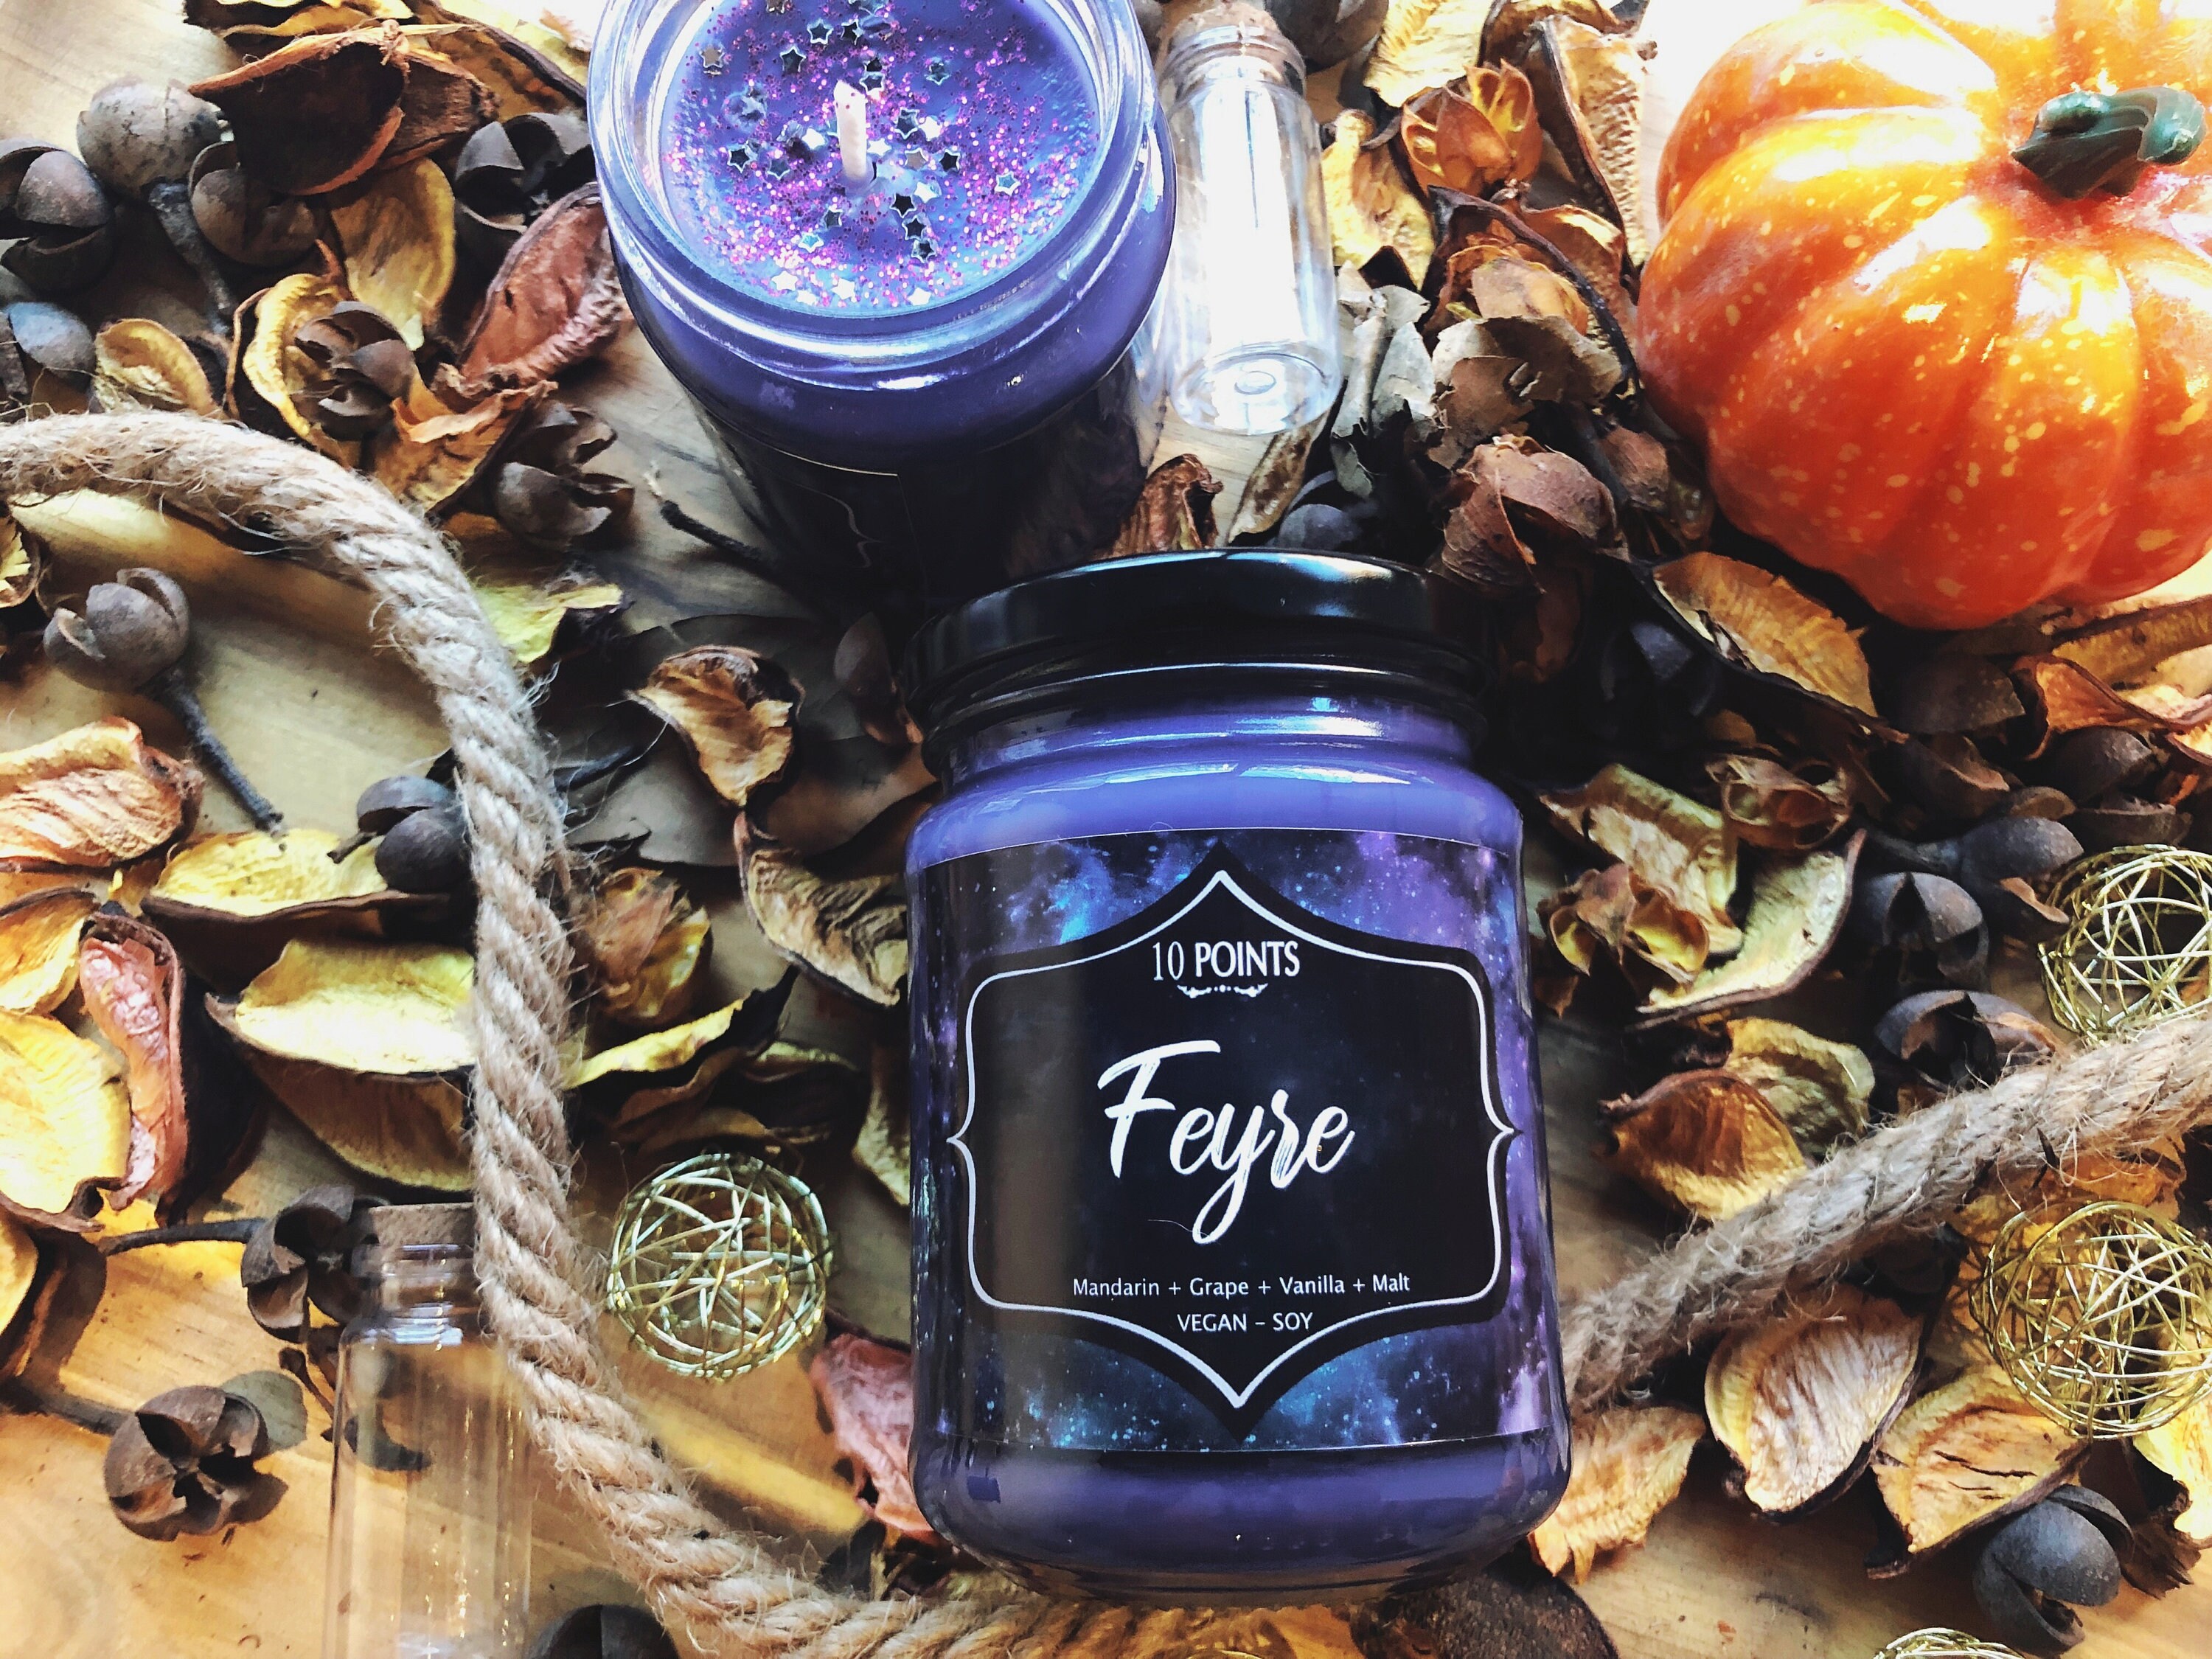 Cardan Cruel Prince, the Folk of the Air Inspired Soy Candle Scent Notes:  Pineapple, Mango N Grape 